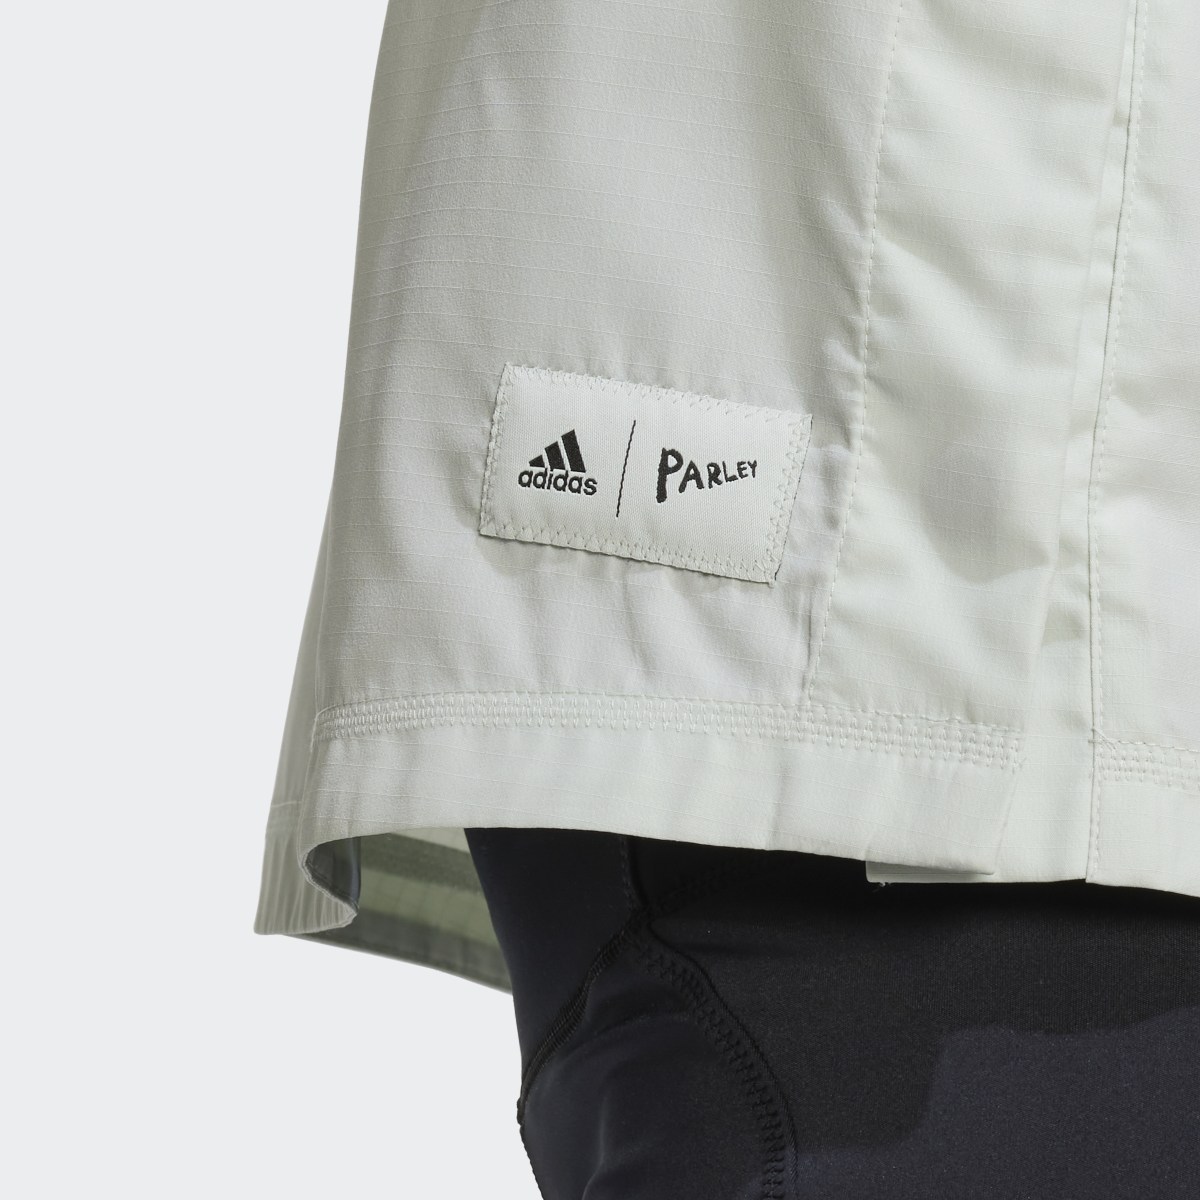 Adidas Parley Run for the Oceans Hooded Top. 6